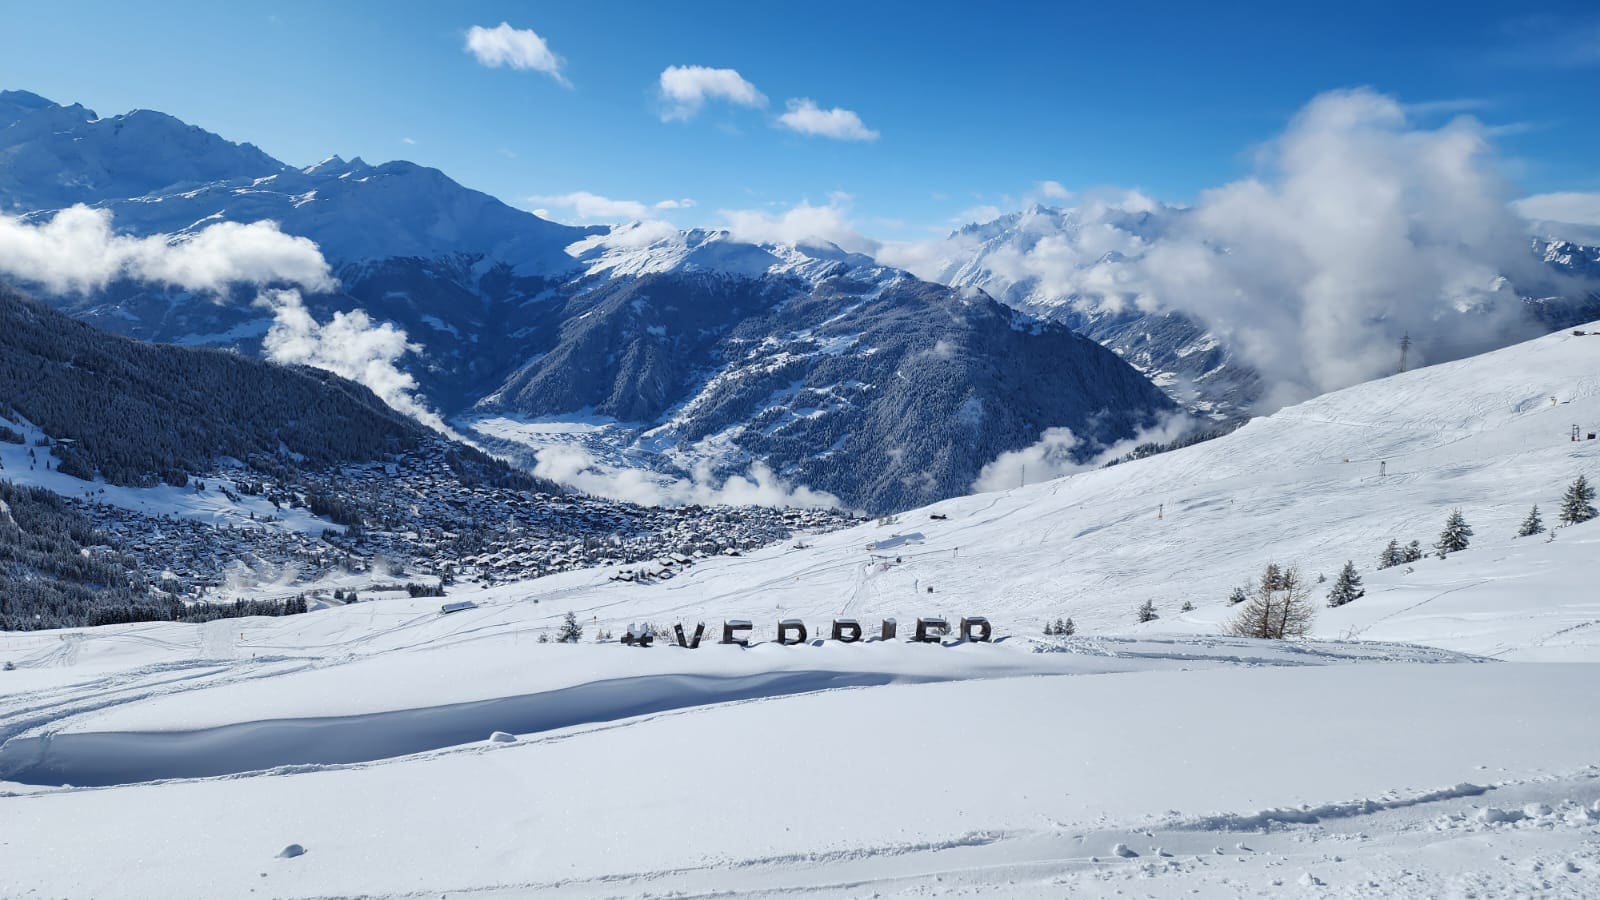 The history of Verbier